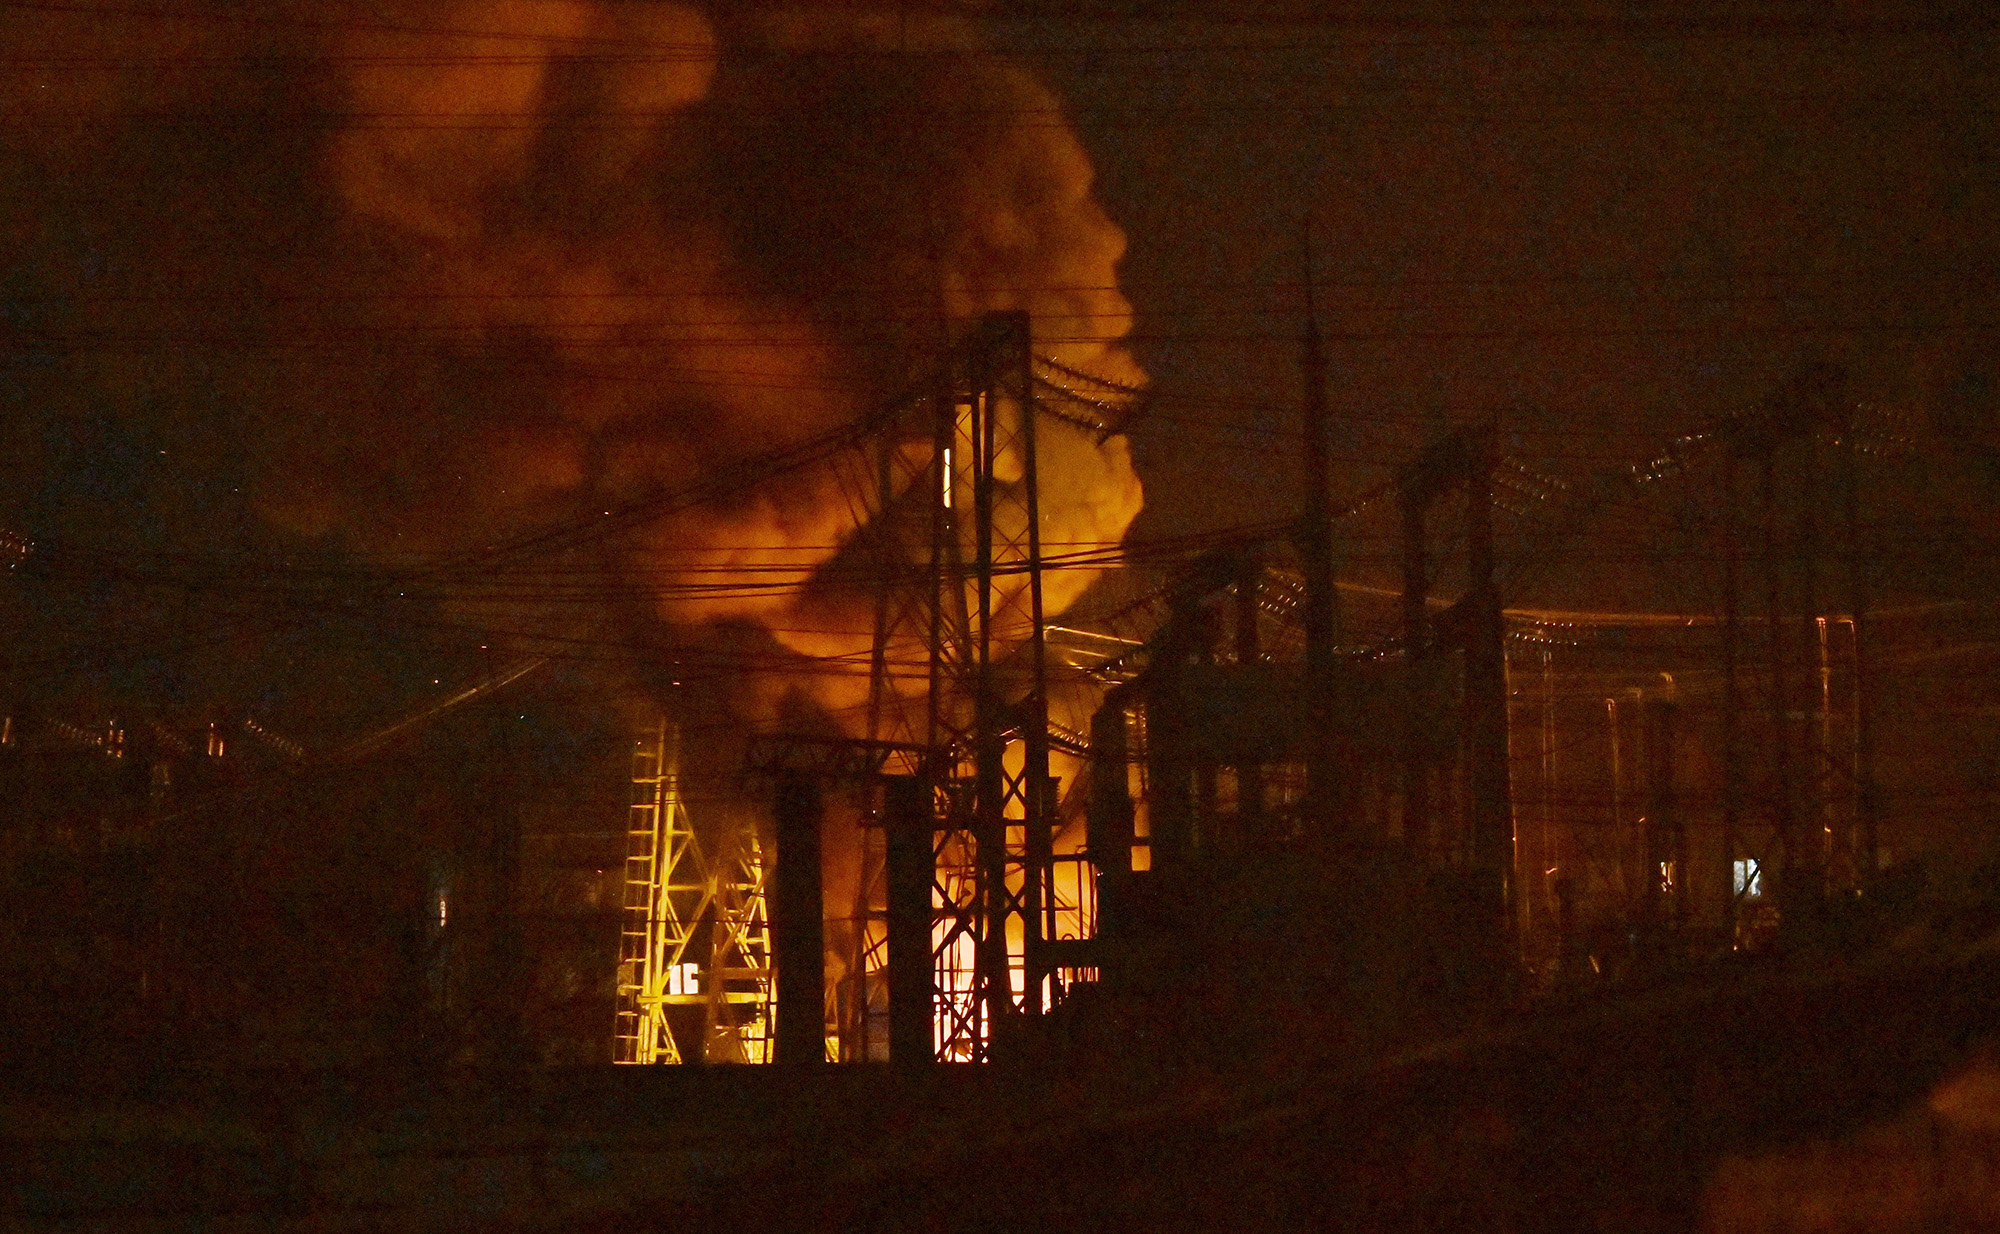 Critical power infrastructure burns after a drone attack in Kyiv, Ukraine, on December 19.